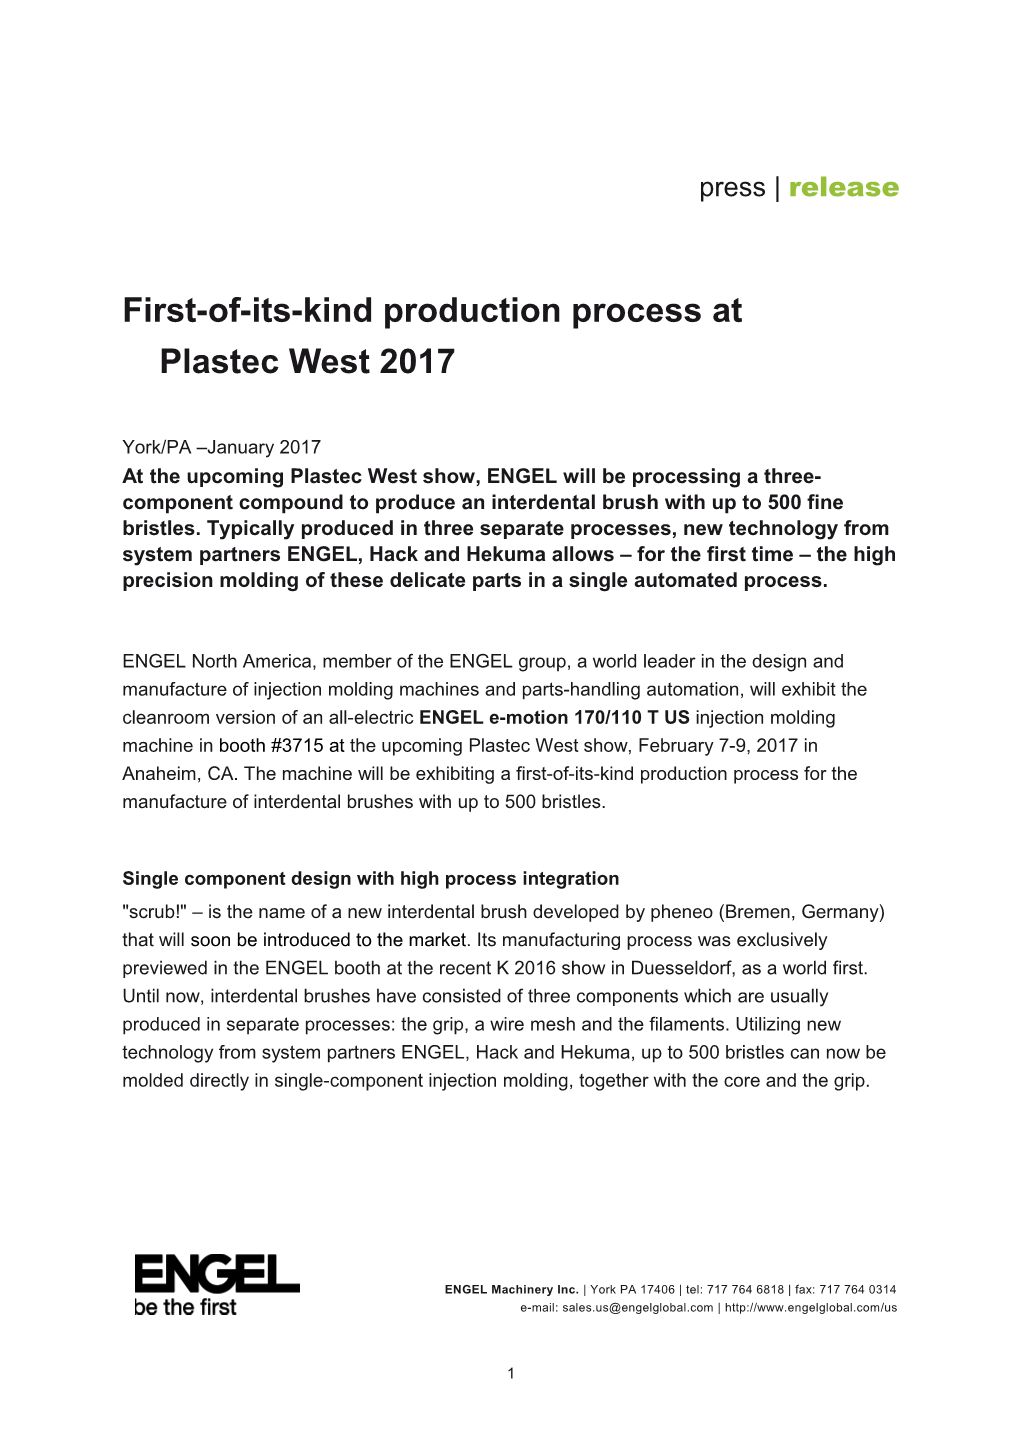 First-Of-Its-Kind Production Process at Plastec West 2017